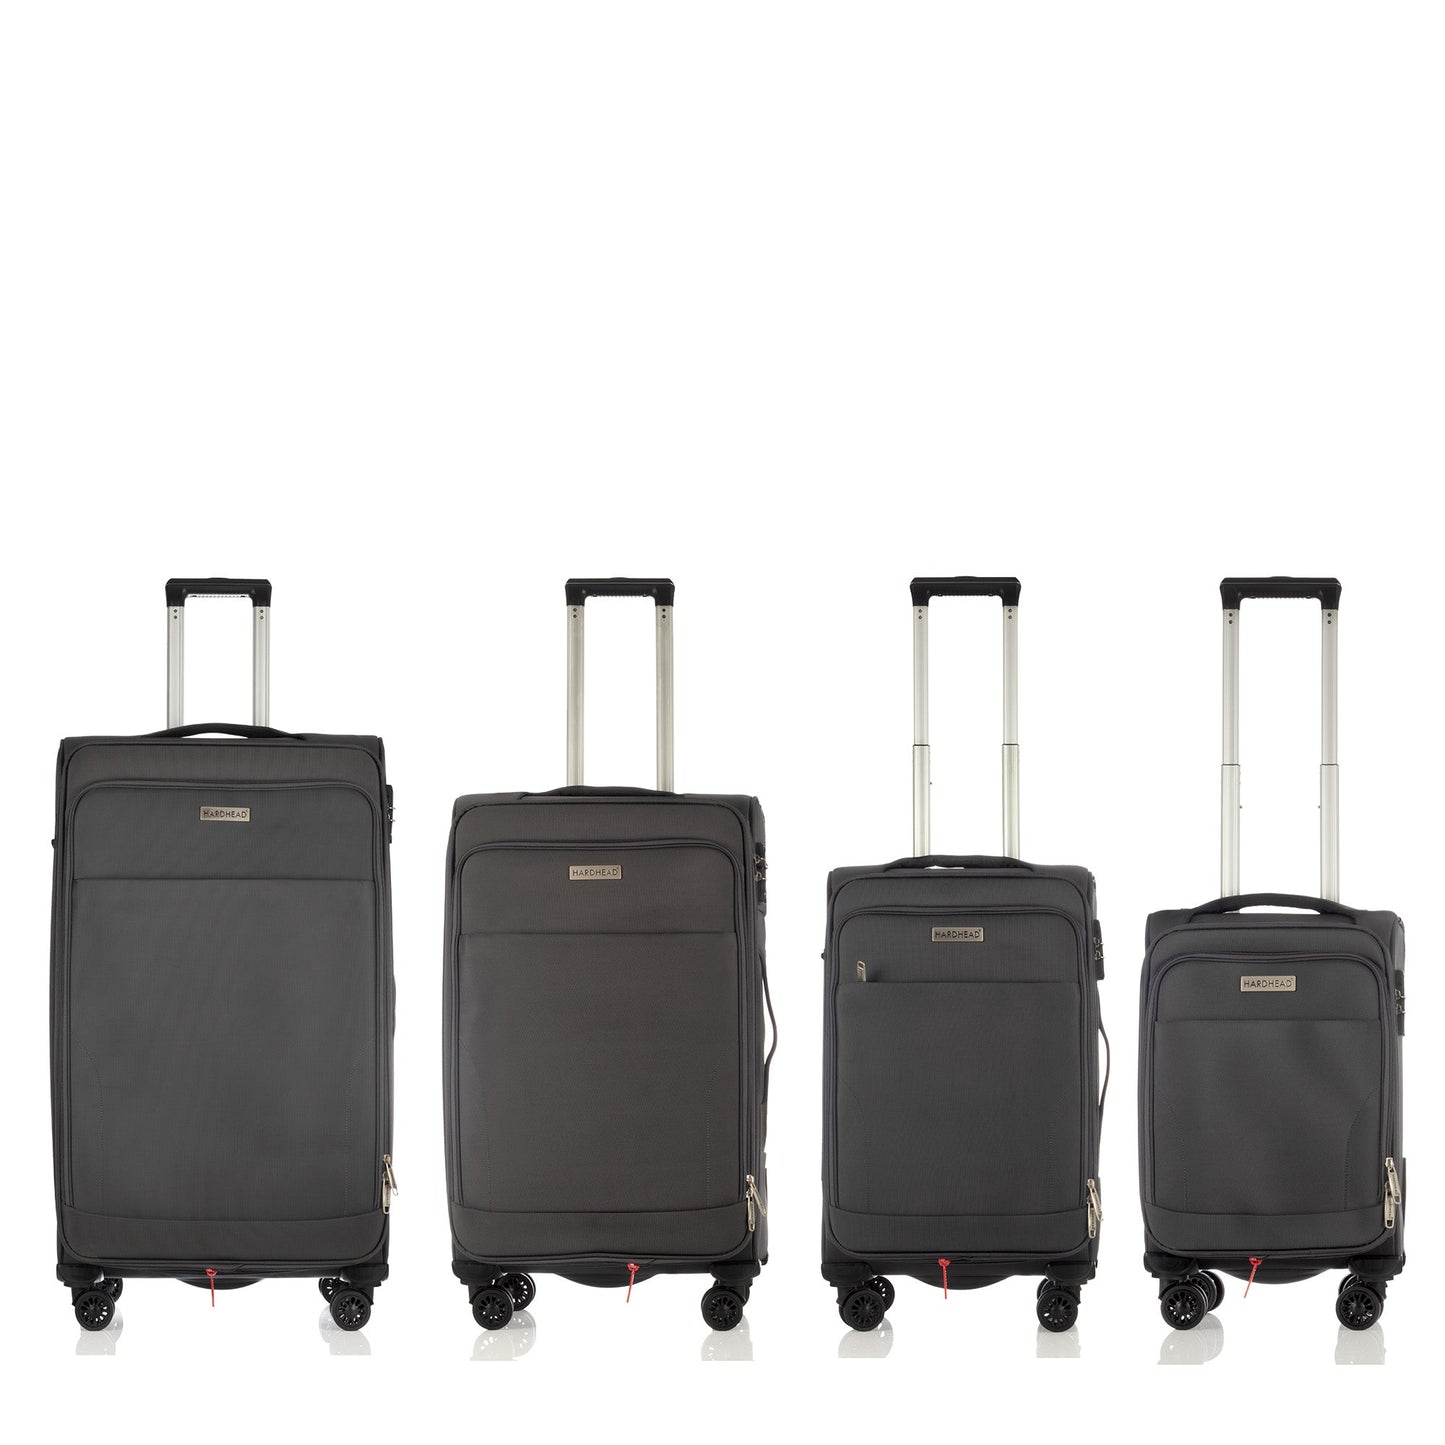 In Heaven Collection Gray Luggage 4 Piece Set (18/20/26/30") Suitcase Lock Spinner Soft